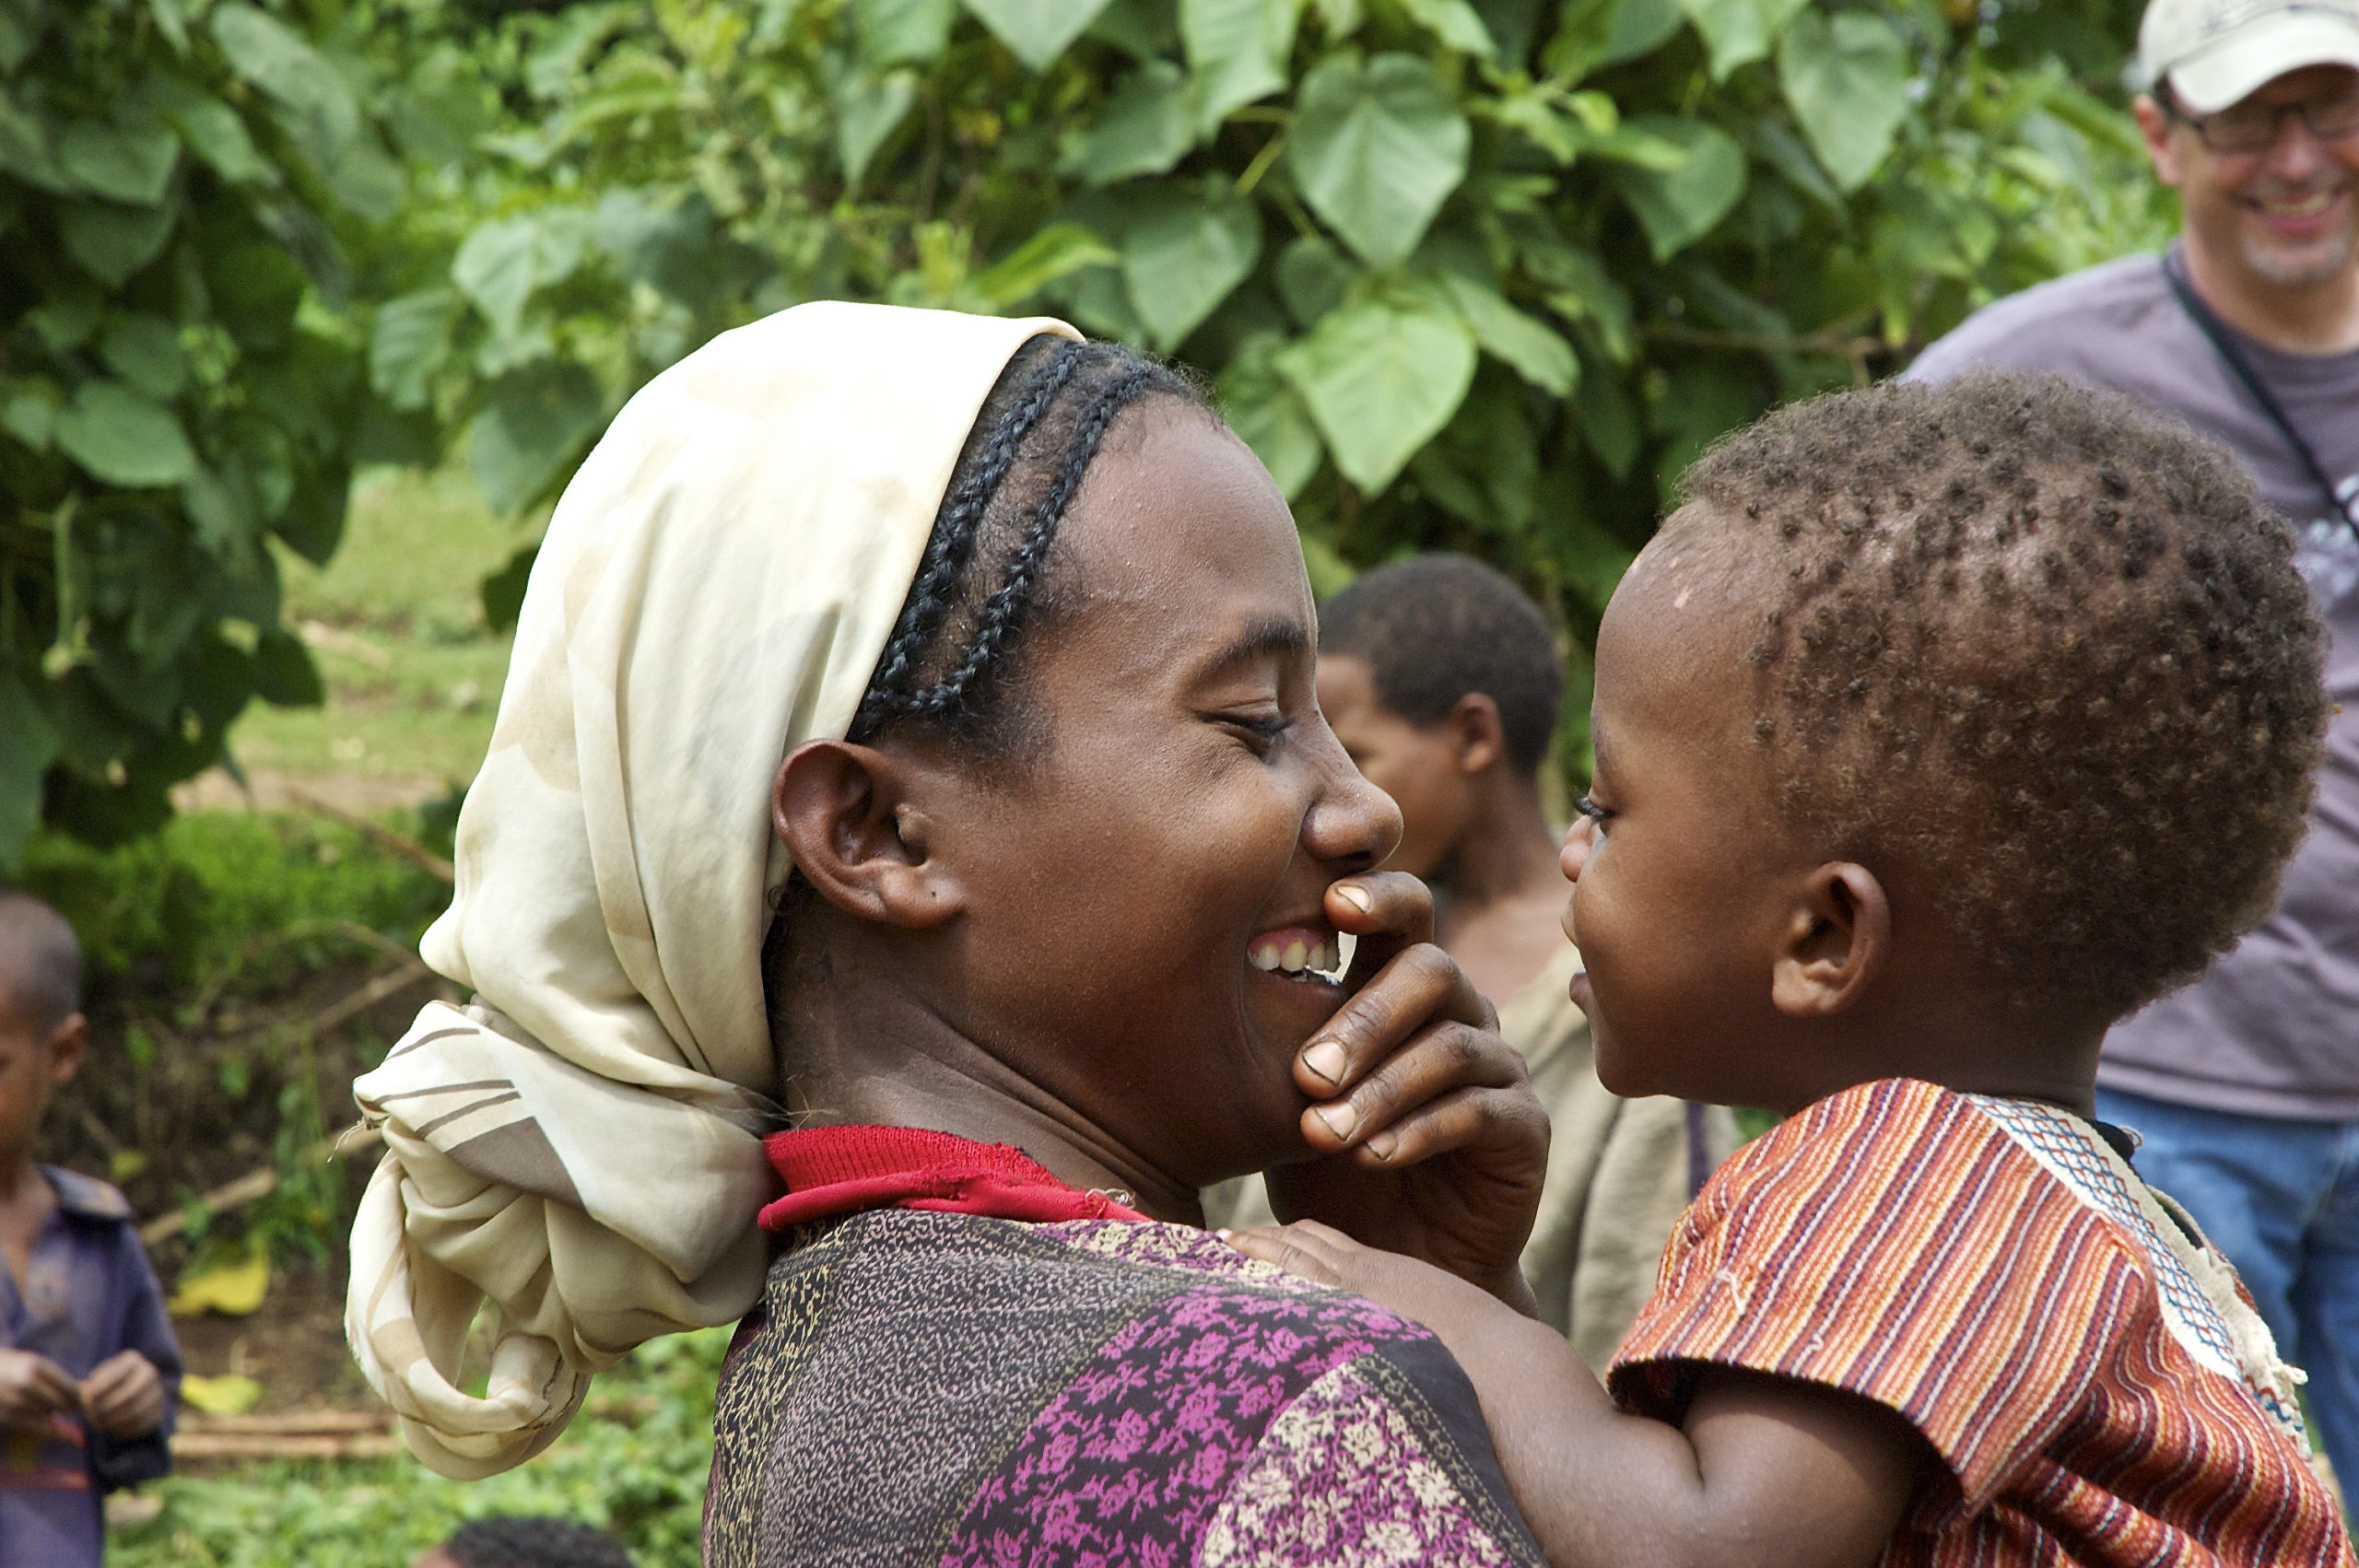 A mother and child giggle together in rural southern Ethiopia